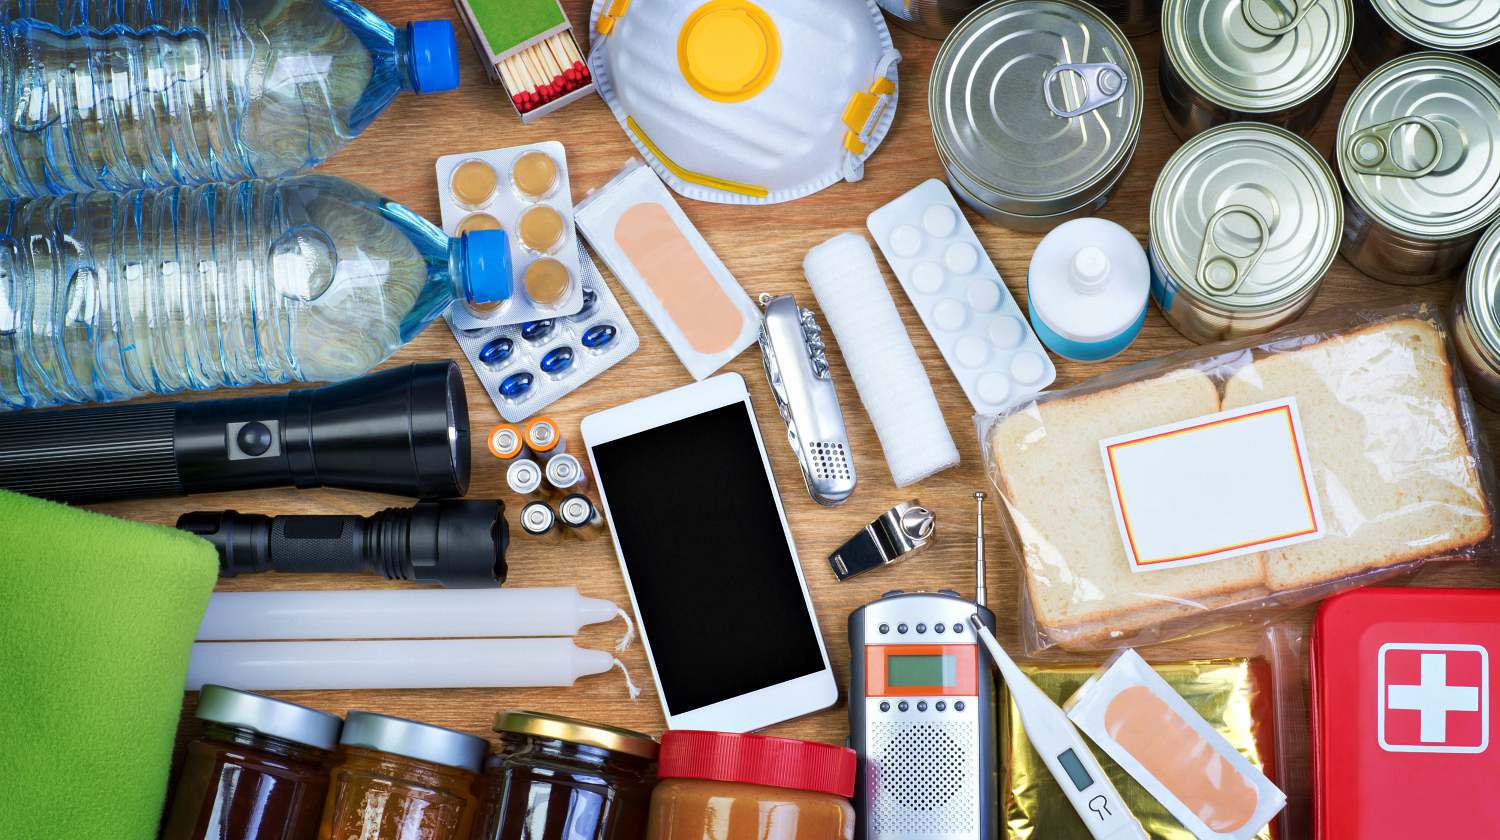 Featured | Objects useful in emergency situations such as natural disasters | Items To Stockpile For Emergencies